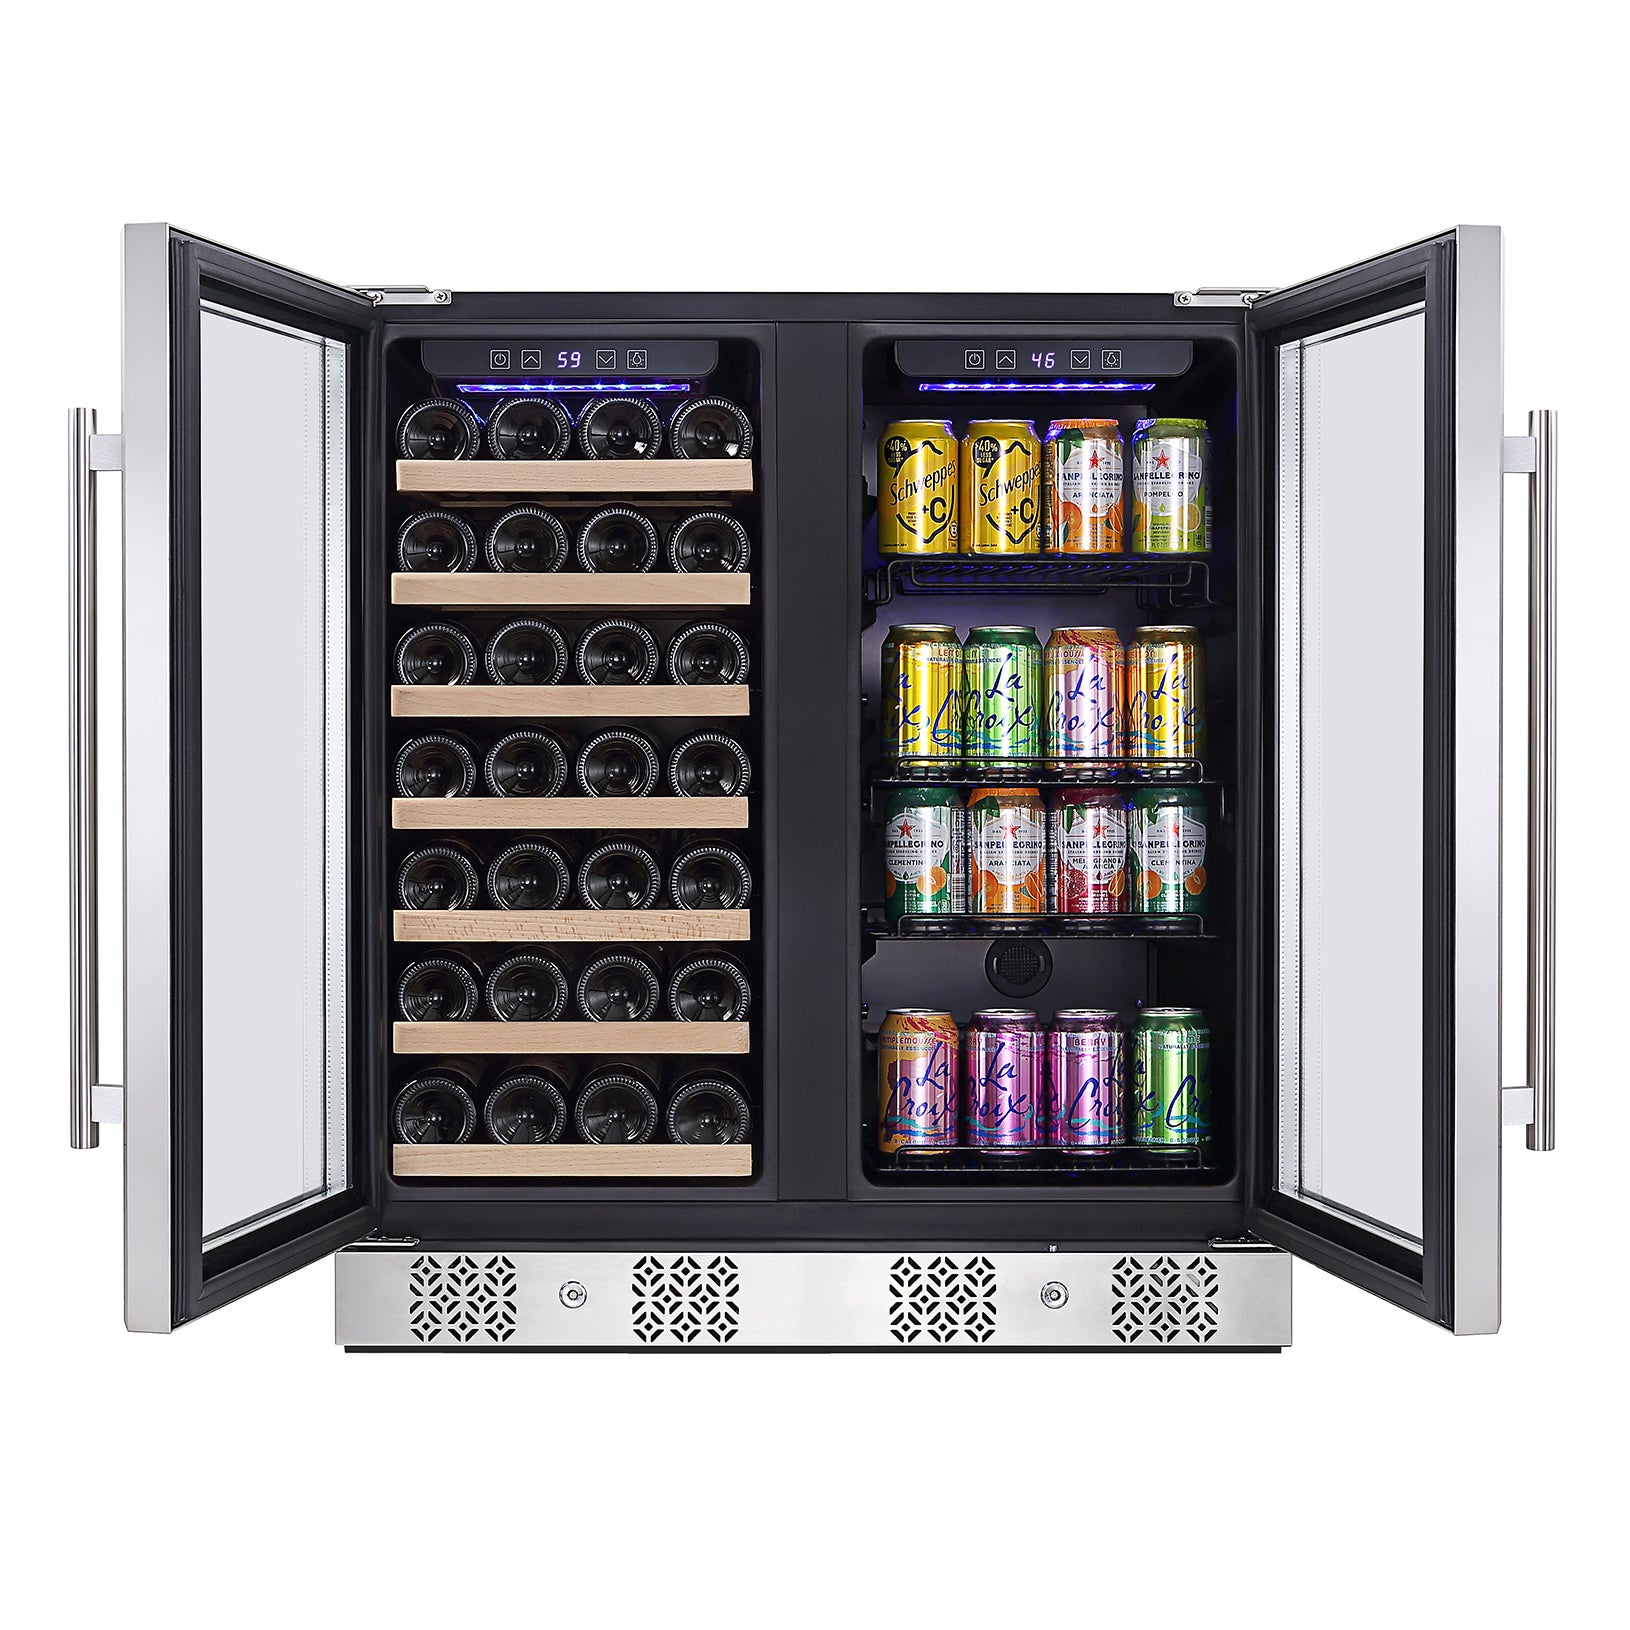 Empava®Dual Zone Wine And Beverage Cooler Top Rated – Empava Appliances